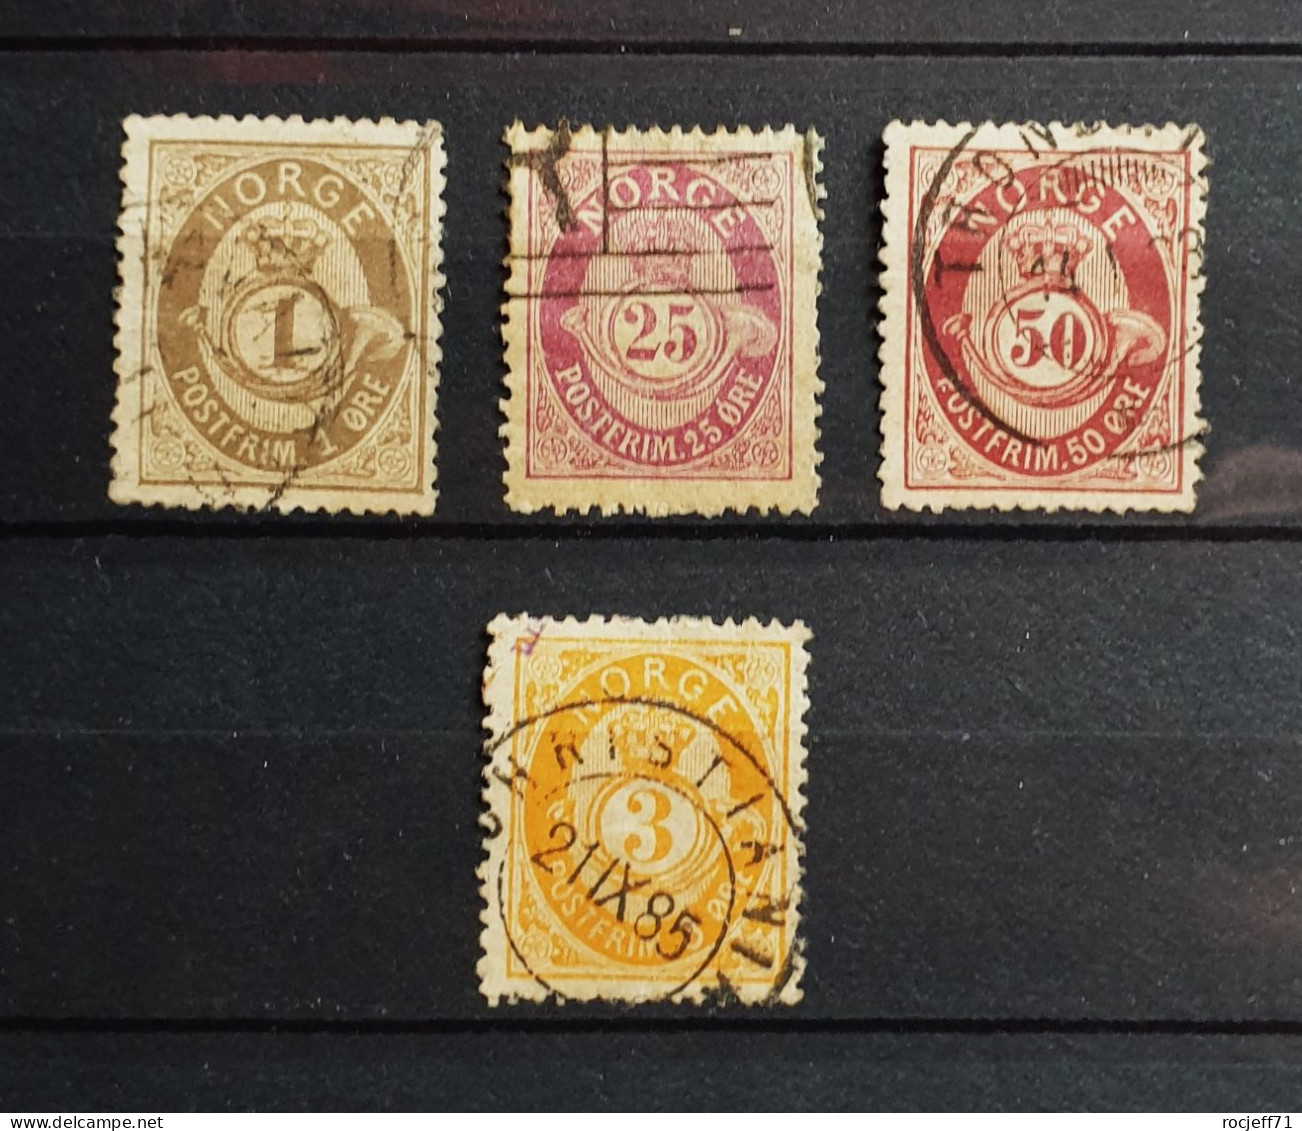 05 - 24 - Gino - Norvège Lot De Vieux Timbres - Norge Old Stamps - Value 100 Euros - Used Stamps